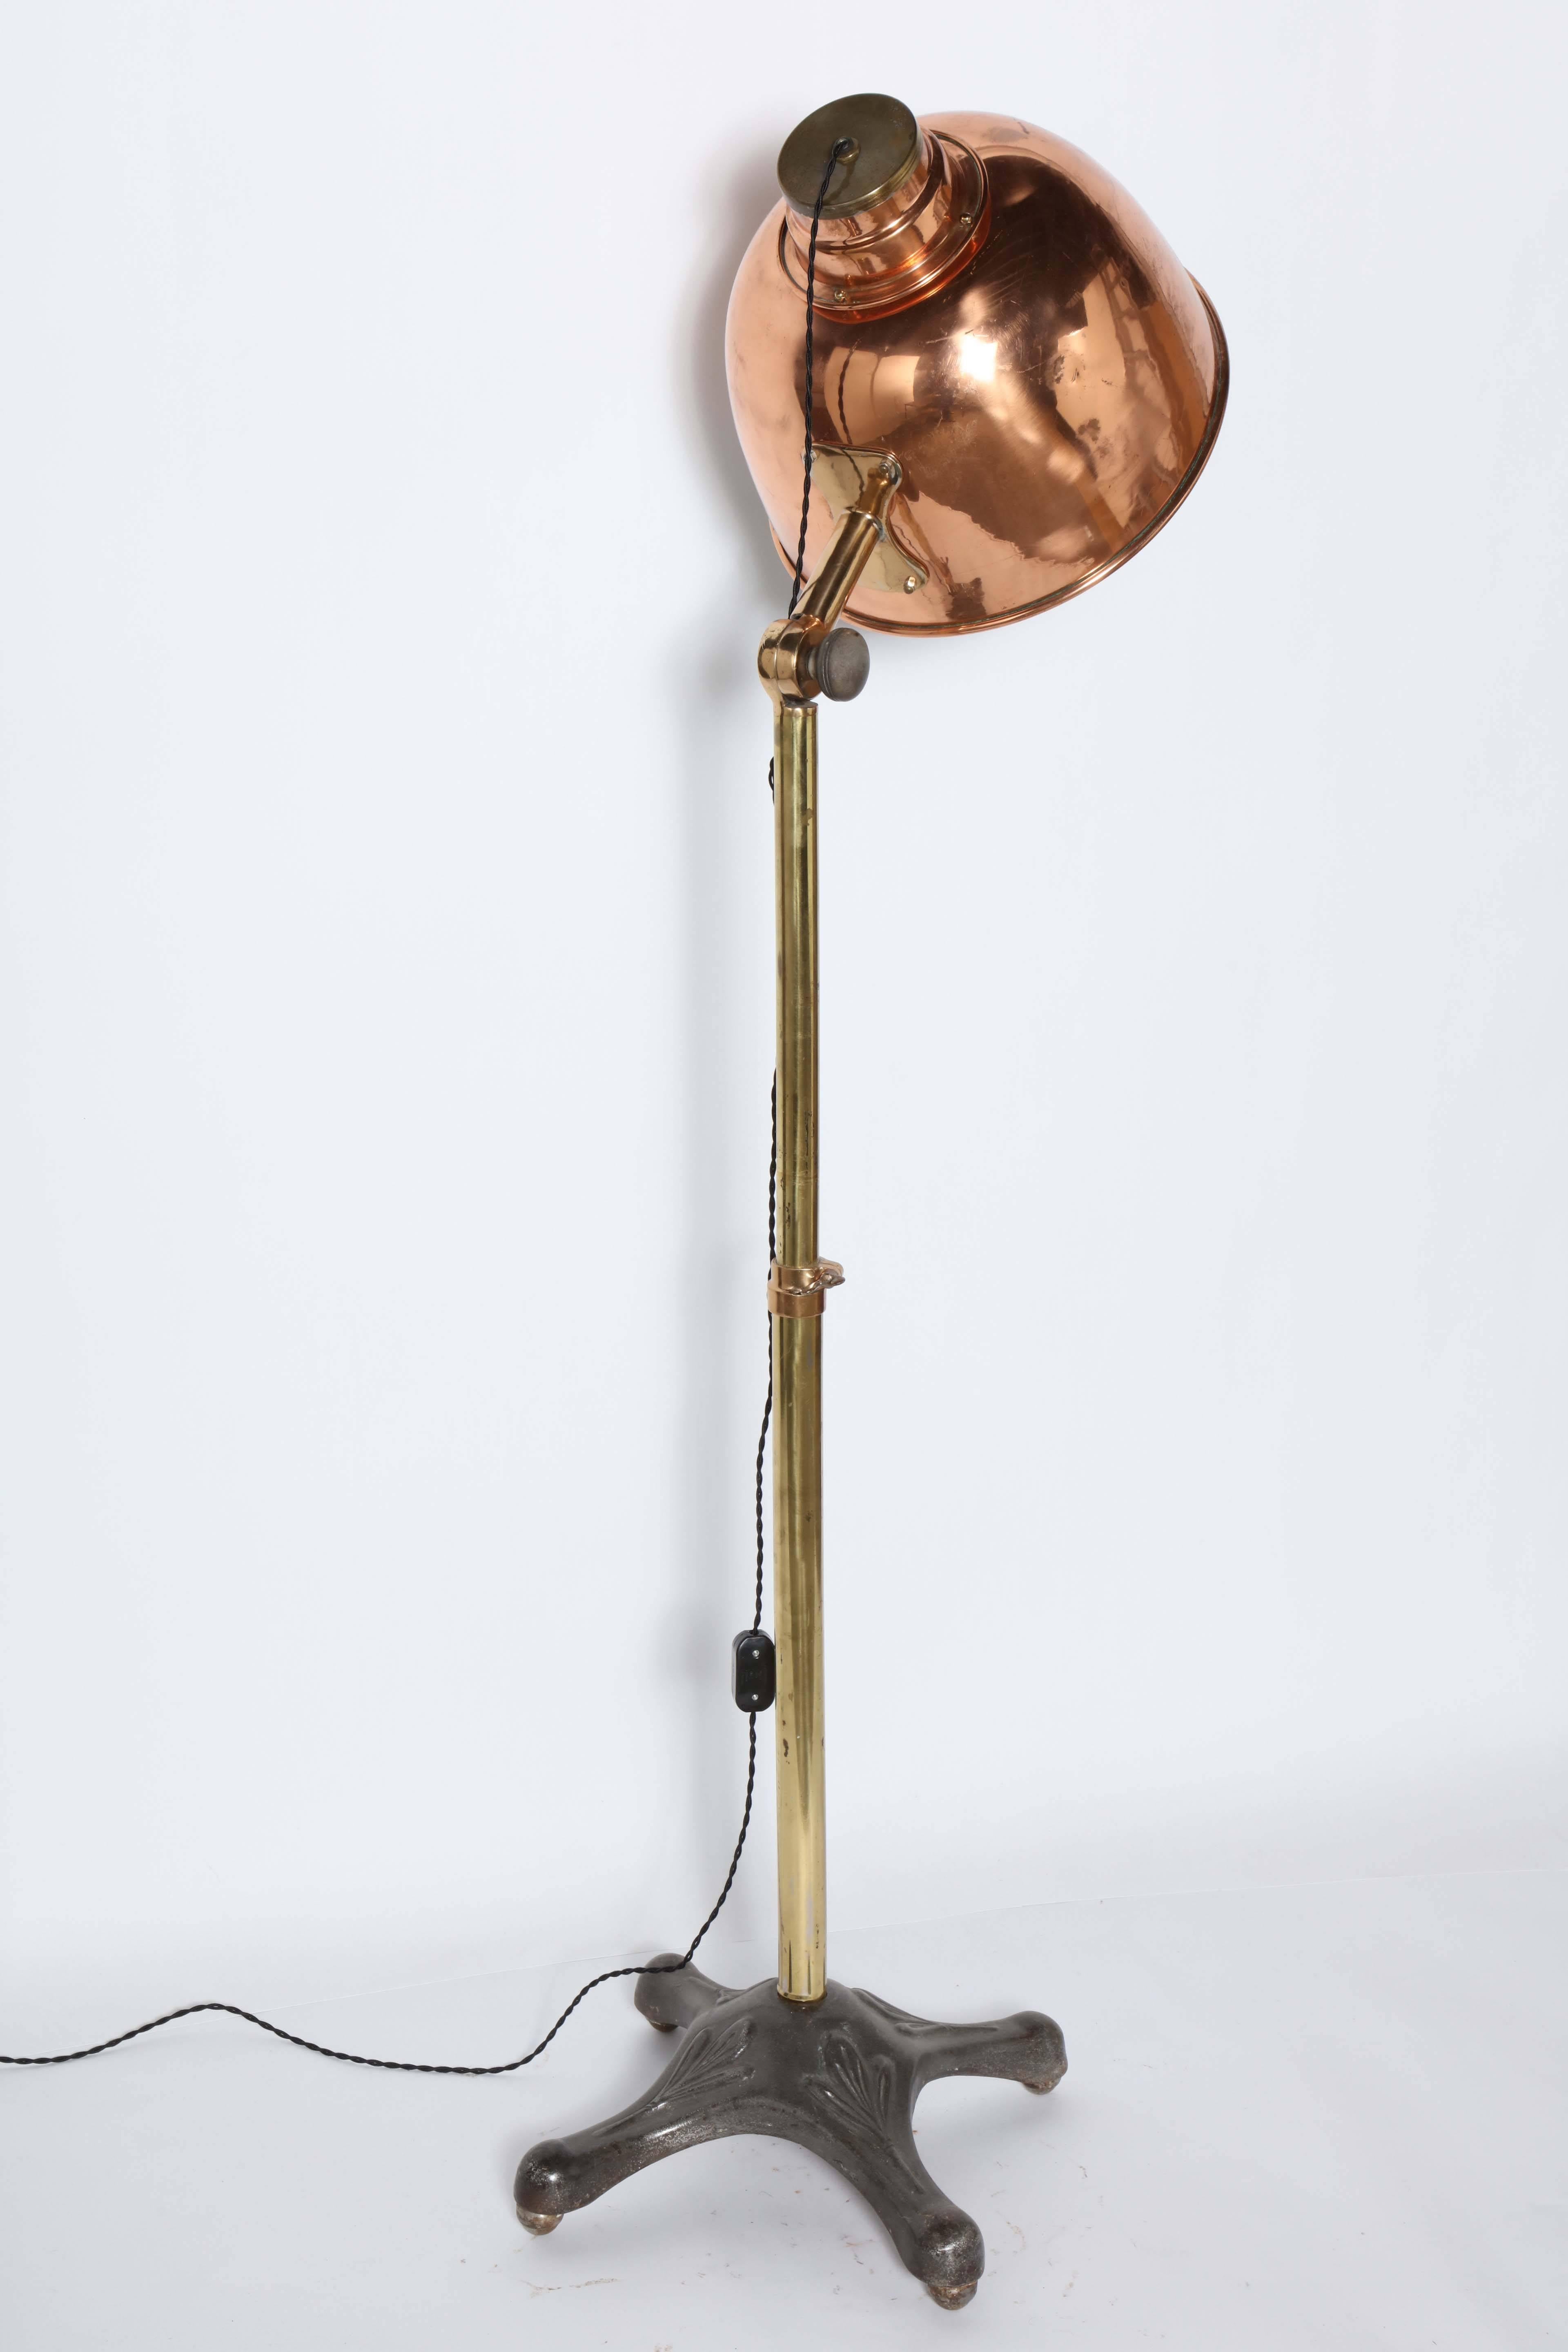 Iron Substantial Infralite Steel & Brass Floor Lamp with Large Copper Shade, C. 1910